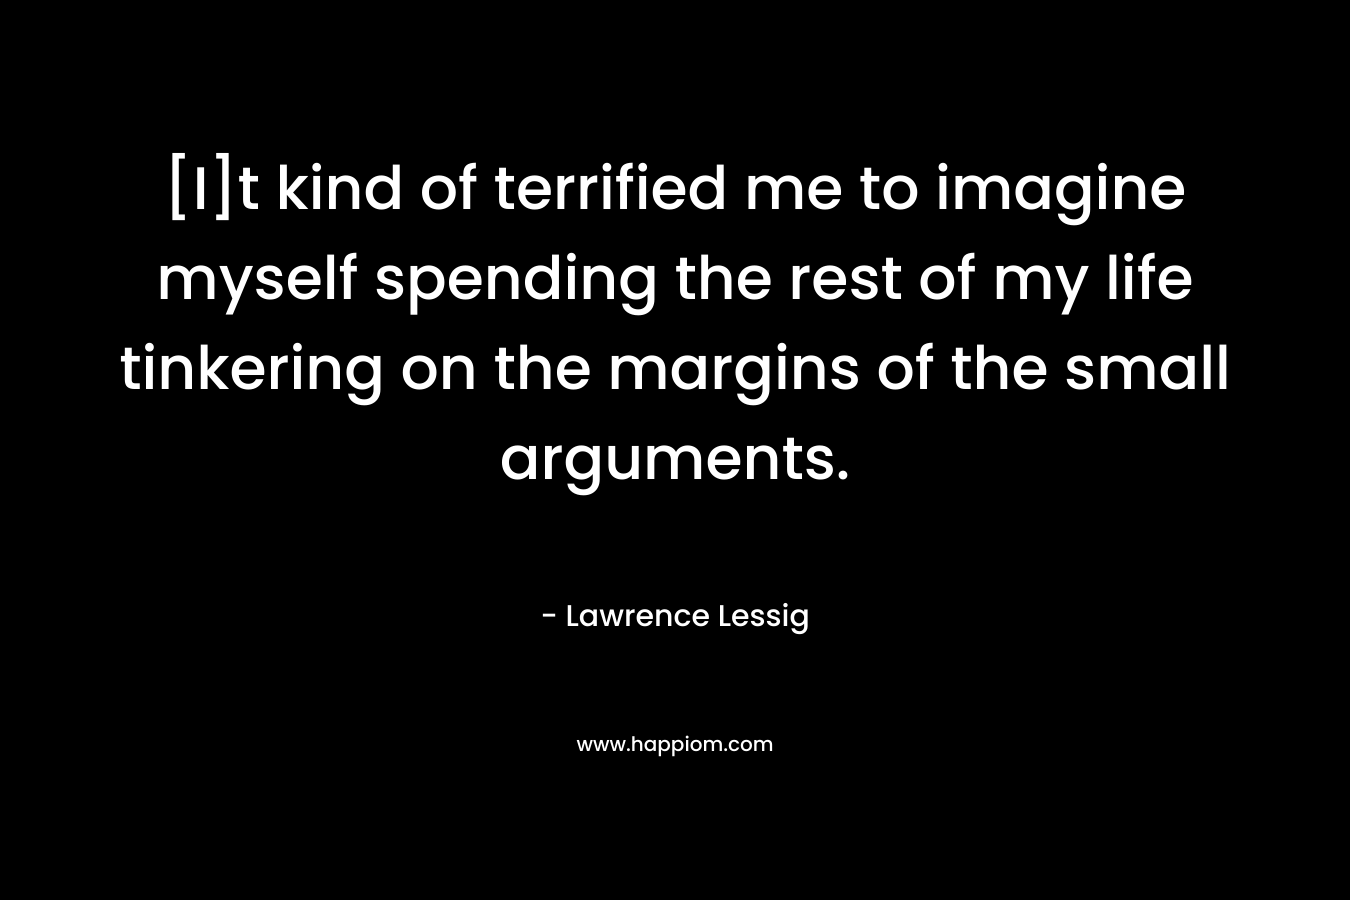 [I]t kind of terrified me to imagine myself spending the rest of my life tinkering on the margins of the small arguments. – Lawrence Lessig